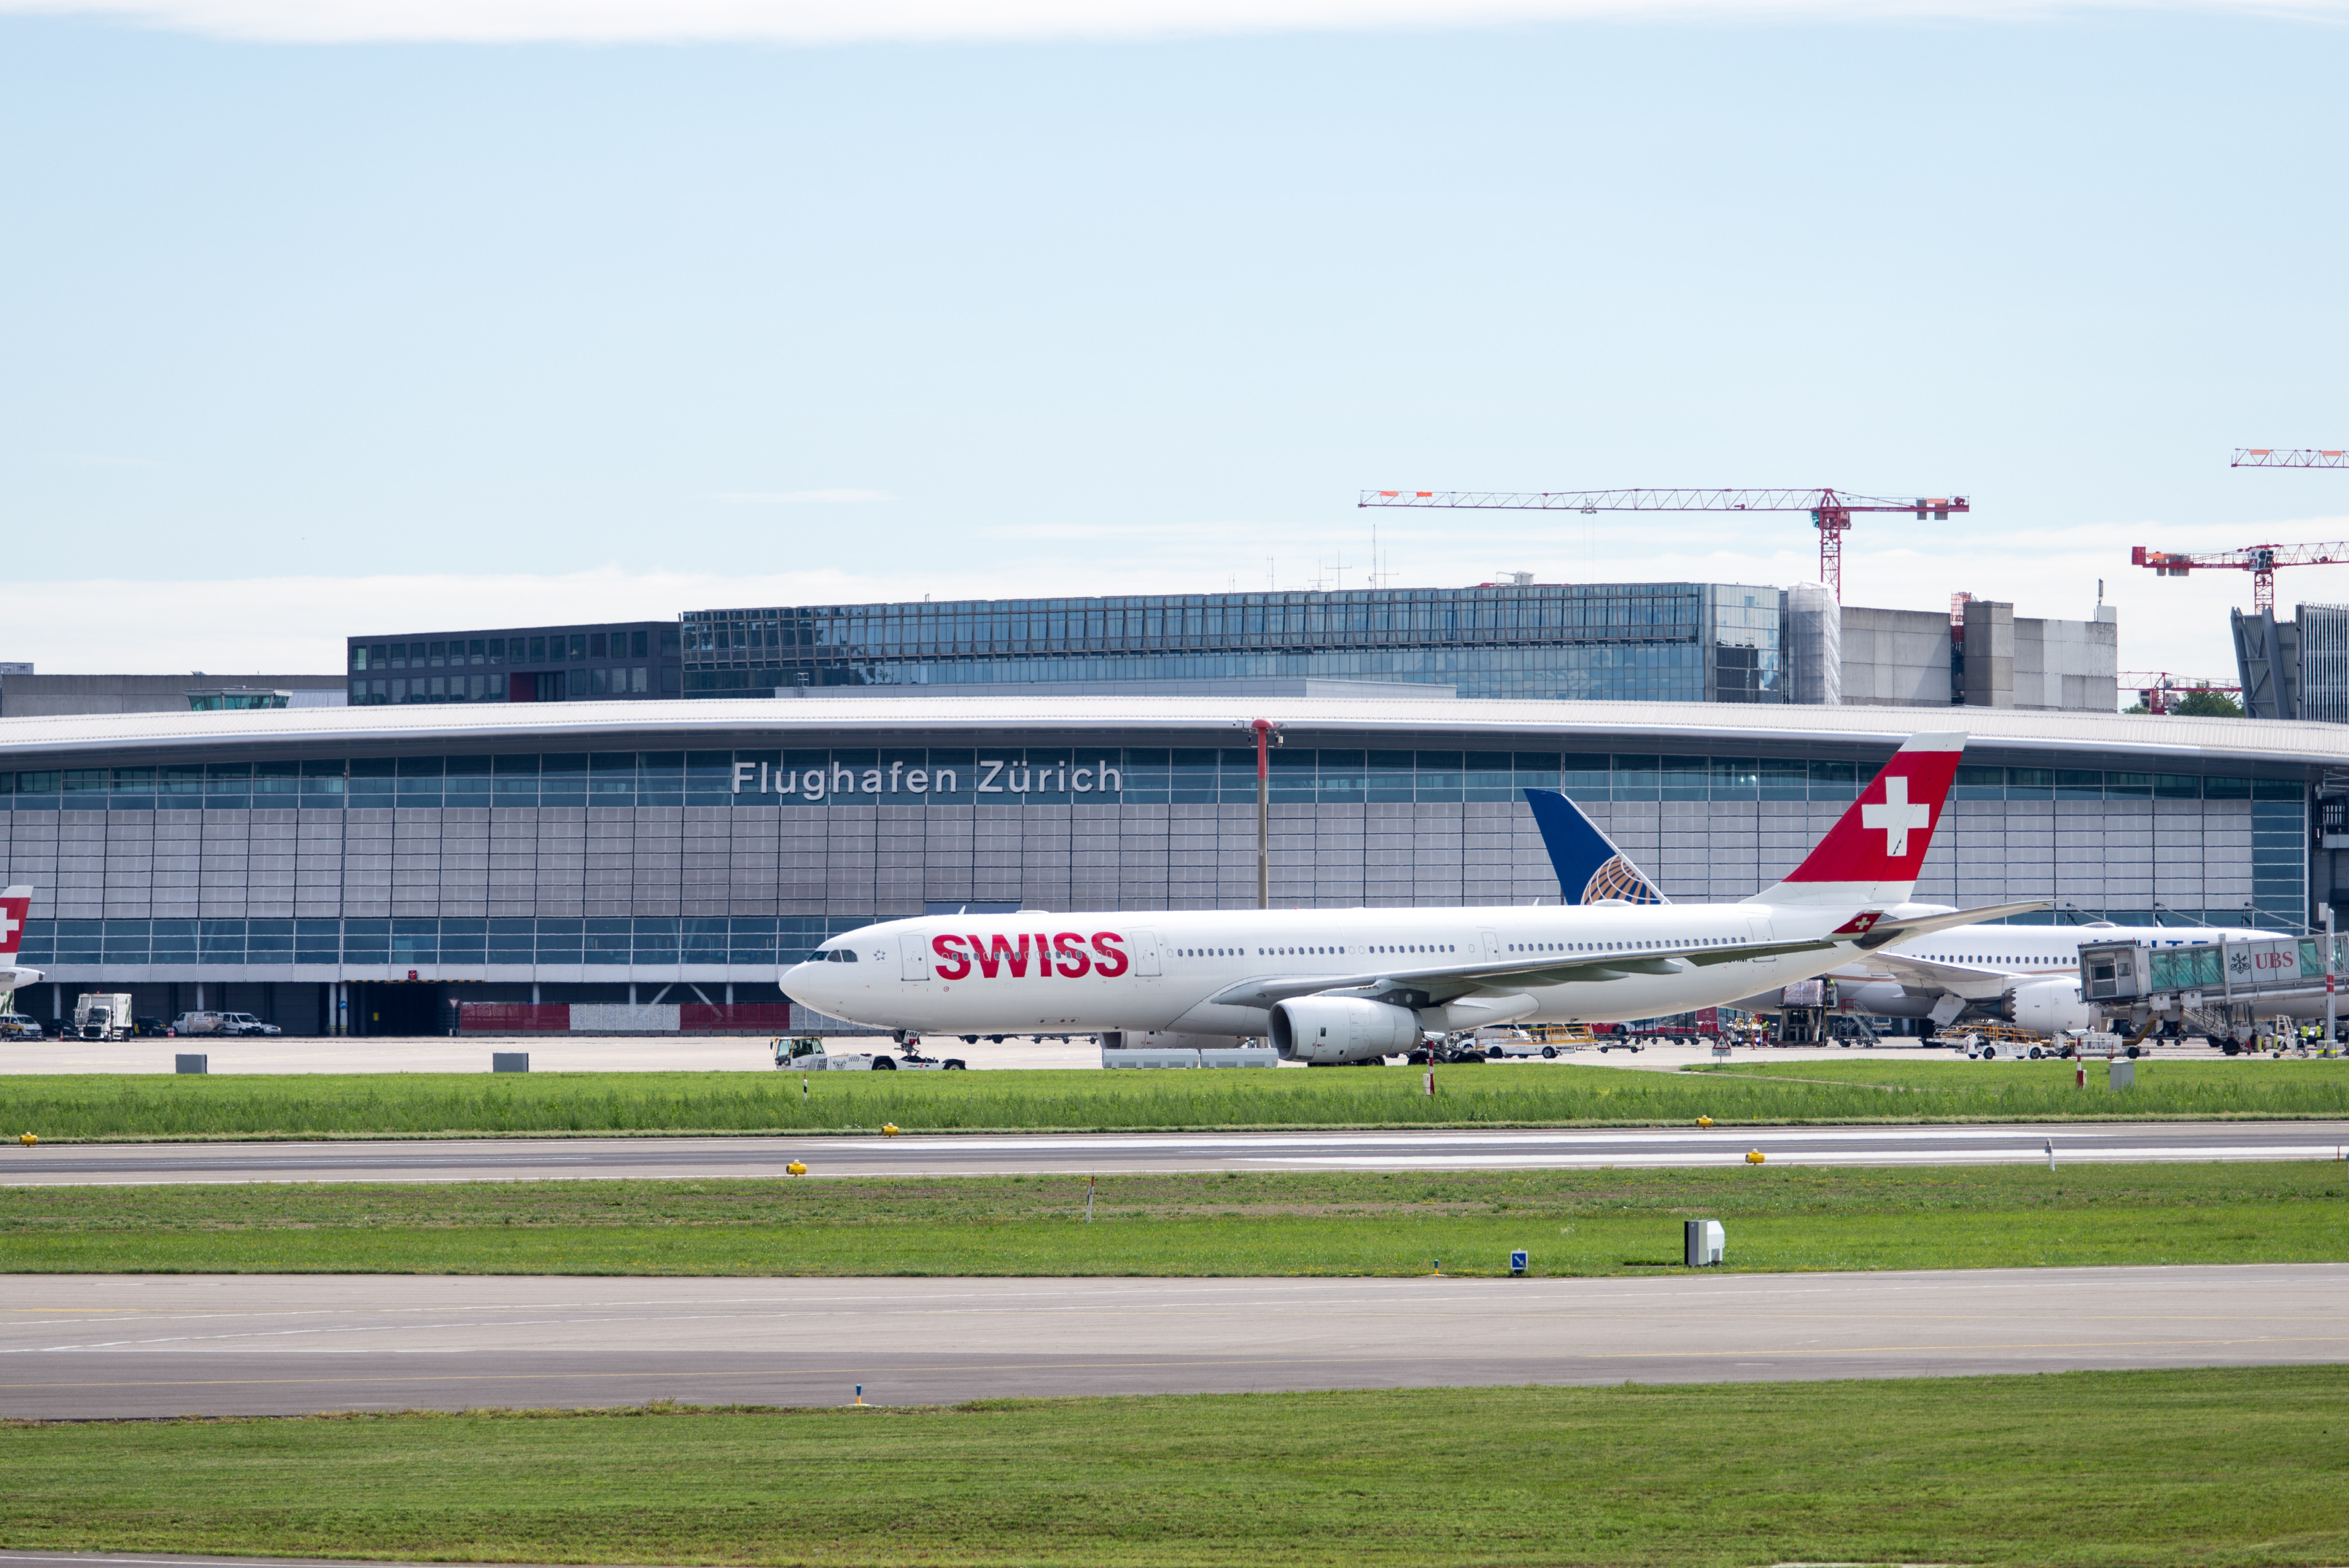 A Swiss A330-300 ready for take off at Zurich Airport. Photo: Shutterstock